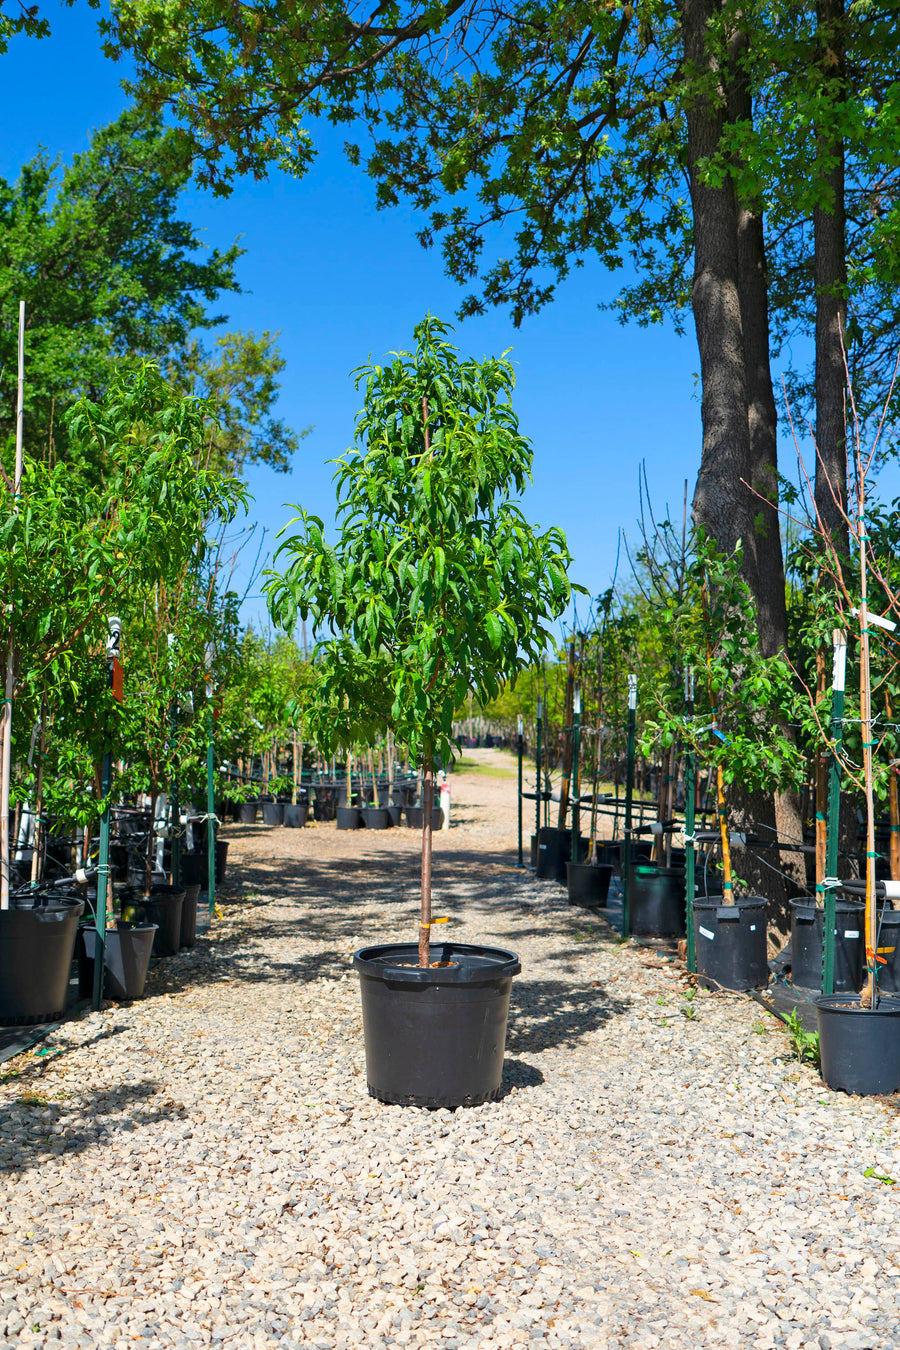 Peach Trees - Fort Worth, Texas - The Tree Place – The Tree Place TX